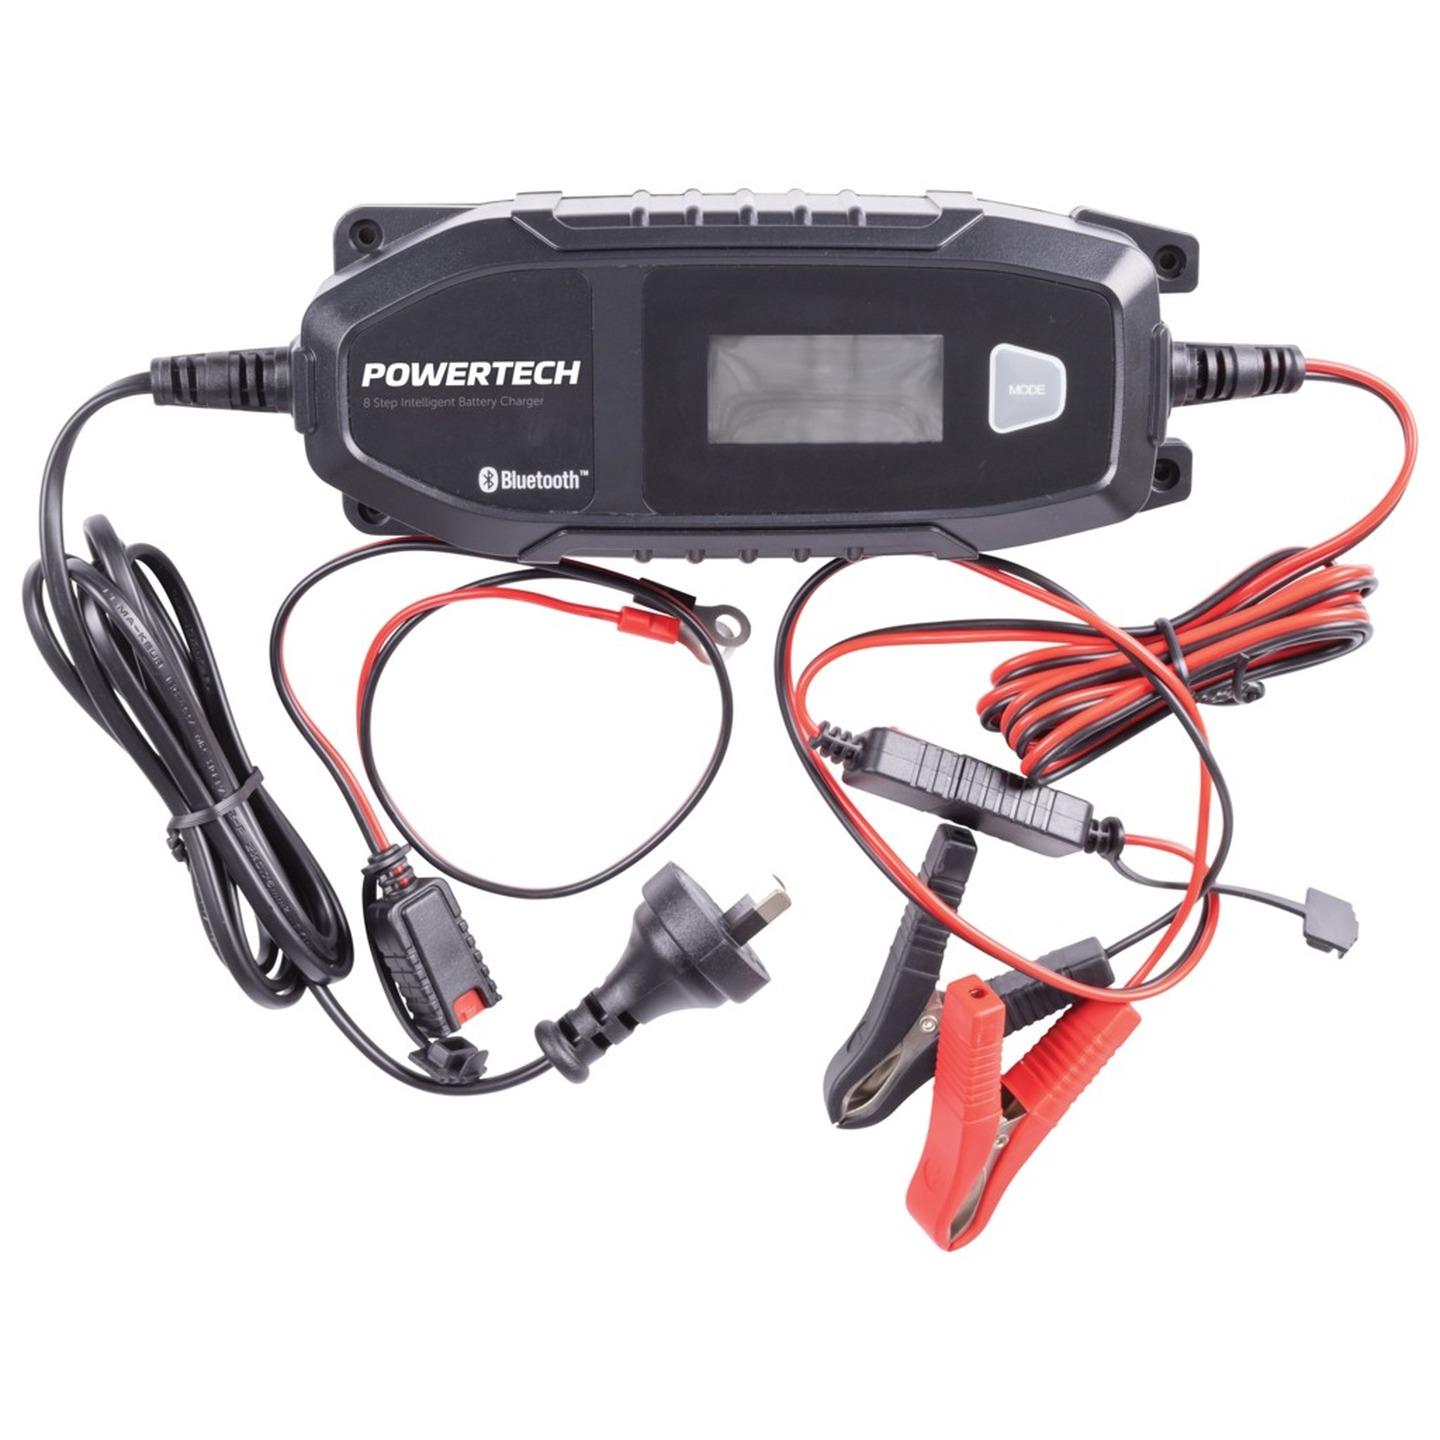 6/12VDC 4A 8-Step Bluetooth Intelligent Lead Acid and Lithium Battery Charger